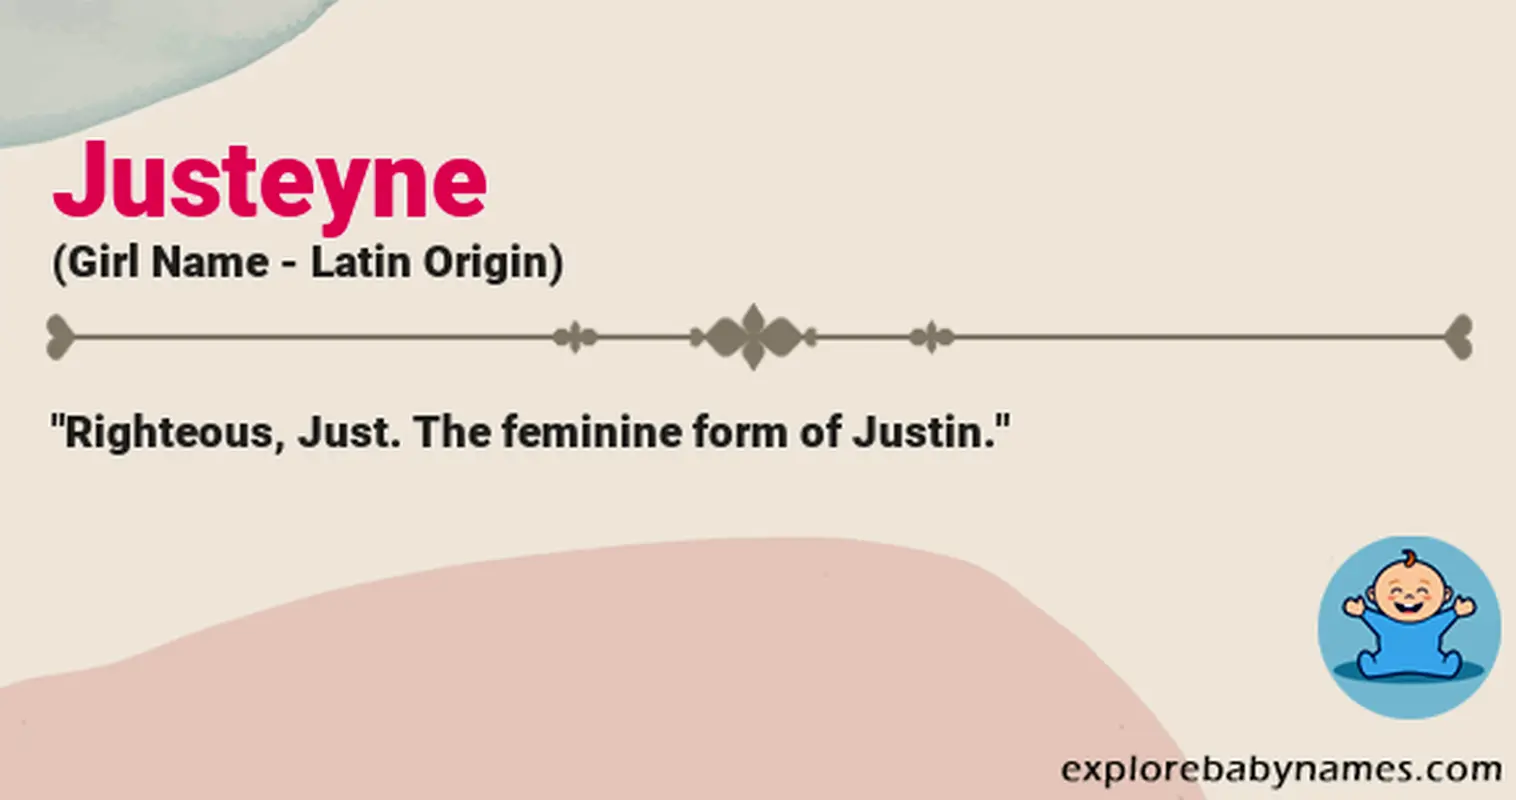 Meaning of Justeyne